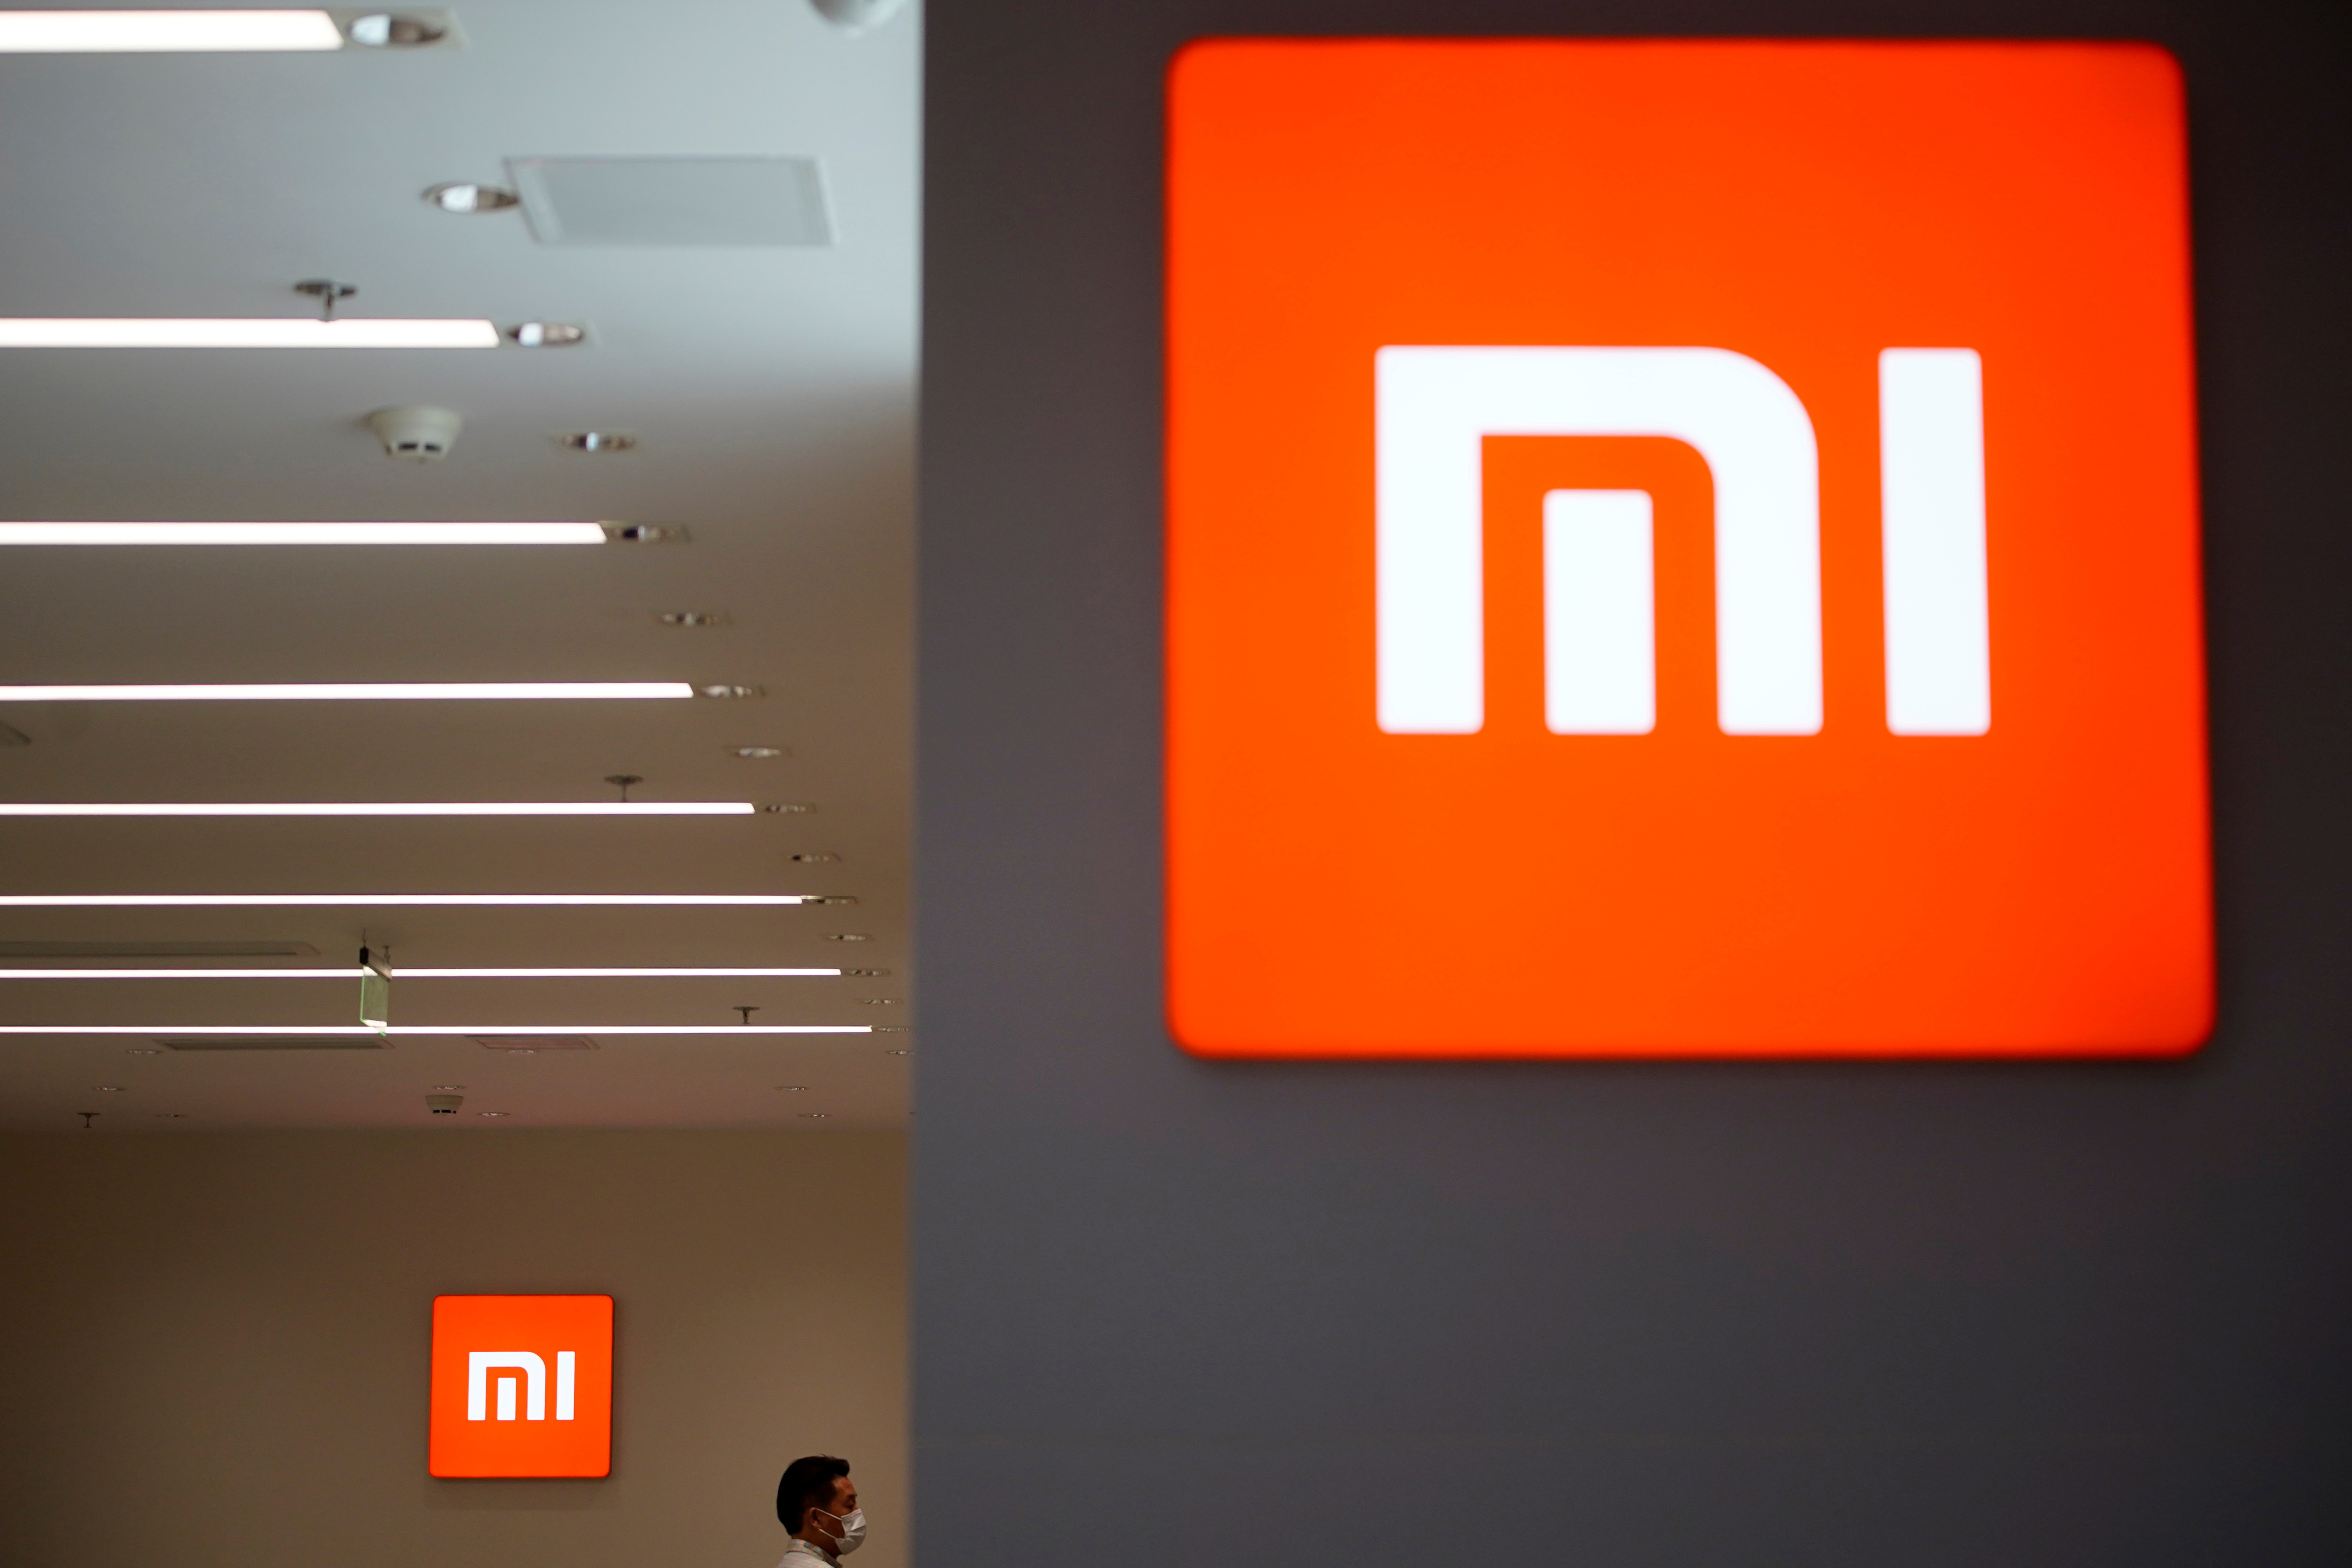 The Xiaomi logo is seen at a Xiaomi shop in Shanghai, China May 12, 2021. REUTERS/Aly Song GLOBAL BUSINESS WEEK AHEAD